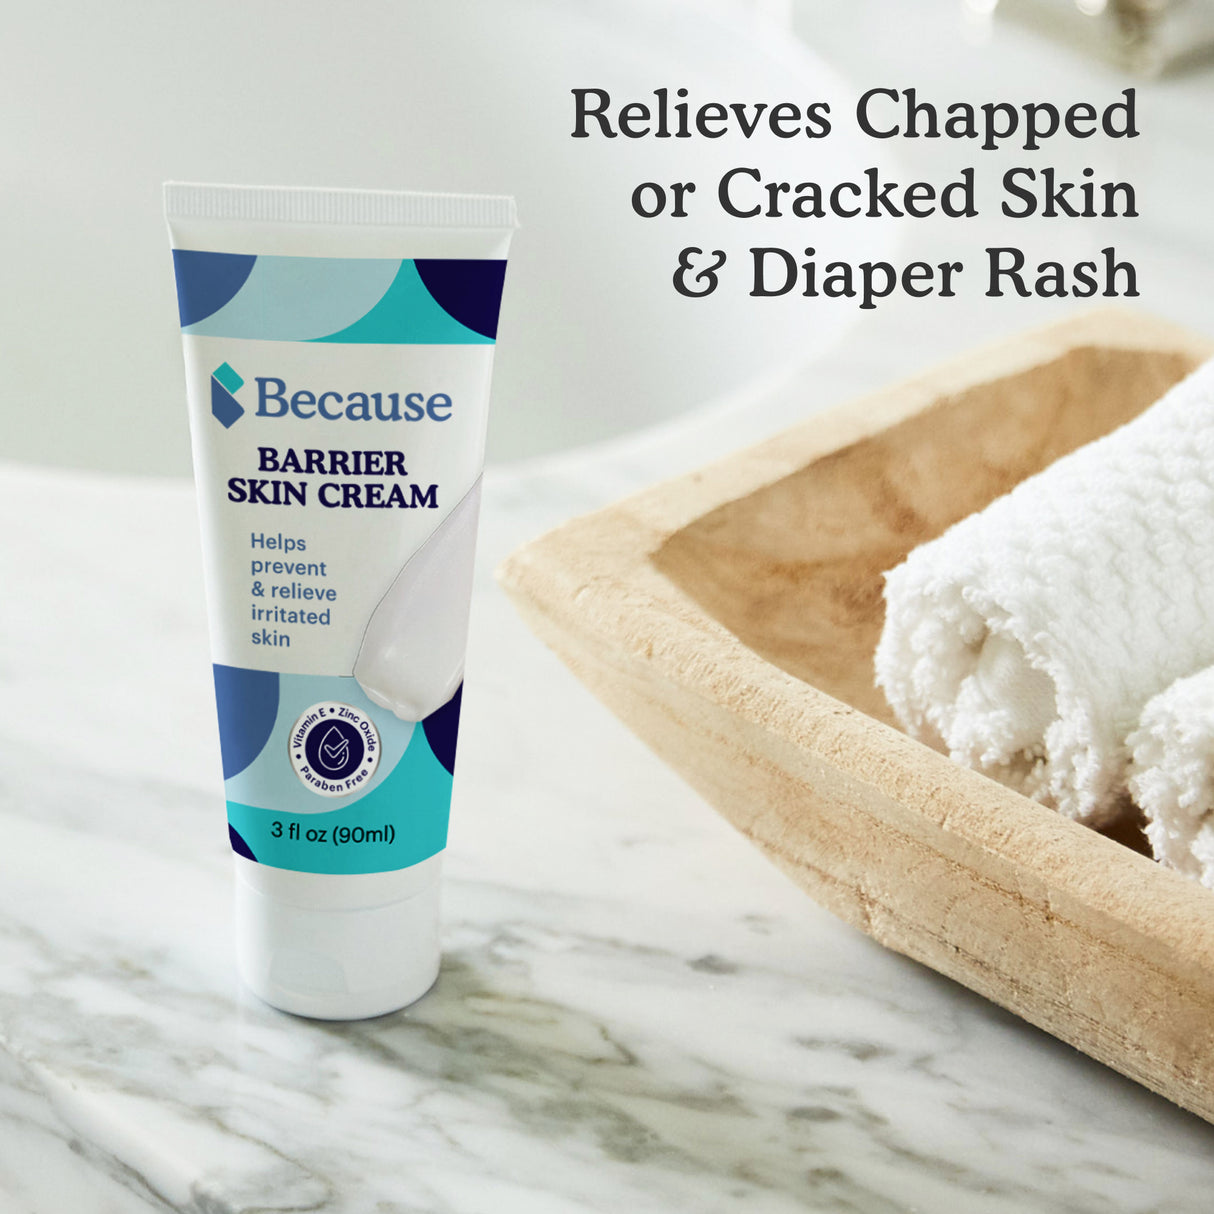 Because Barrier Skin Cream relieves chapped or cracked skin & diaper rash.